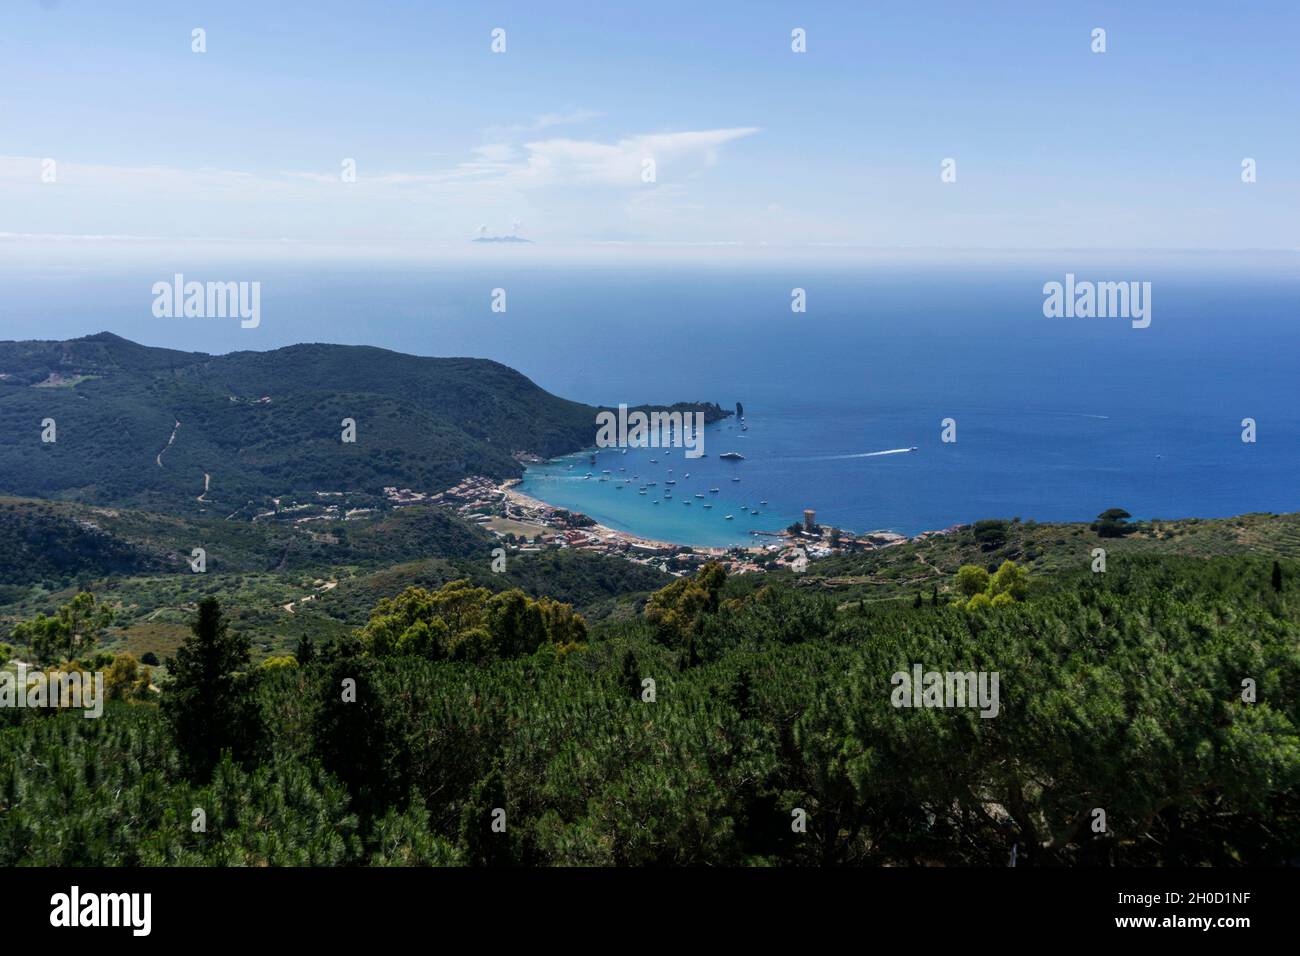 Giglio Campese, Isola del Giglio, Tuscany, Italy, Europe Stock Photo